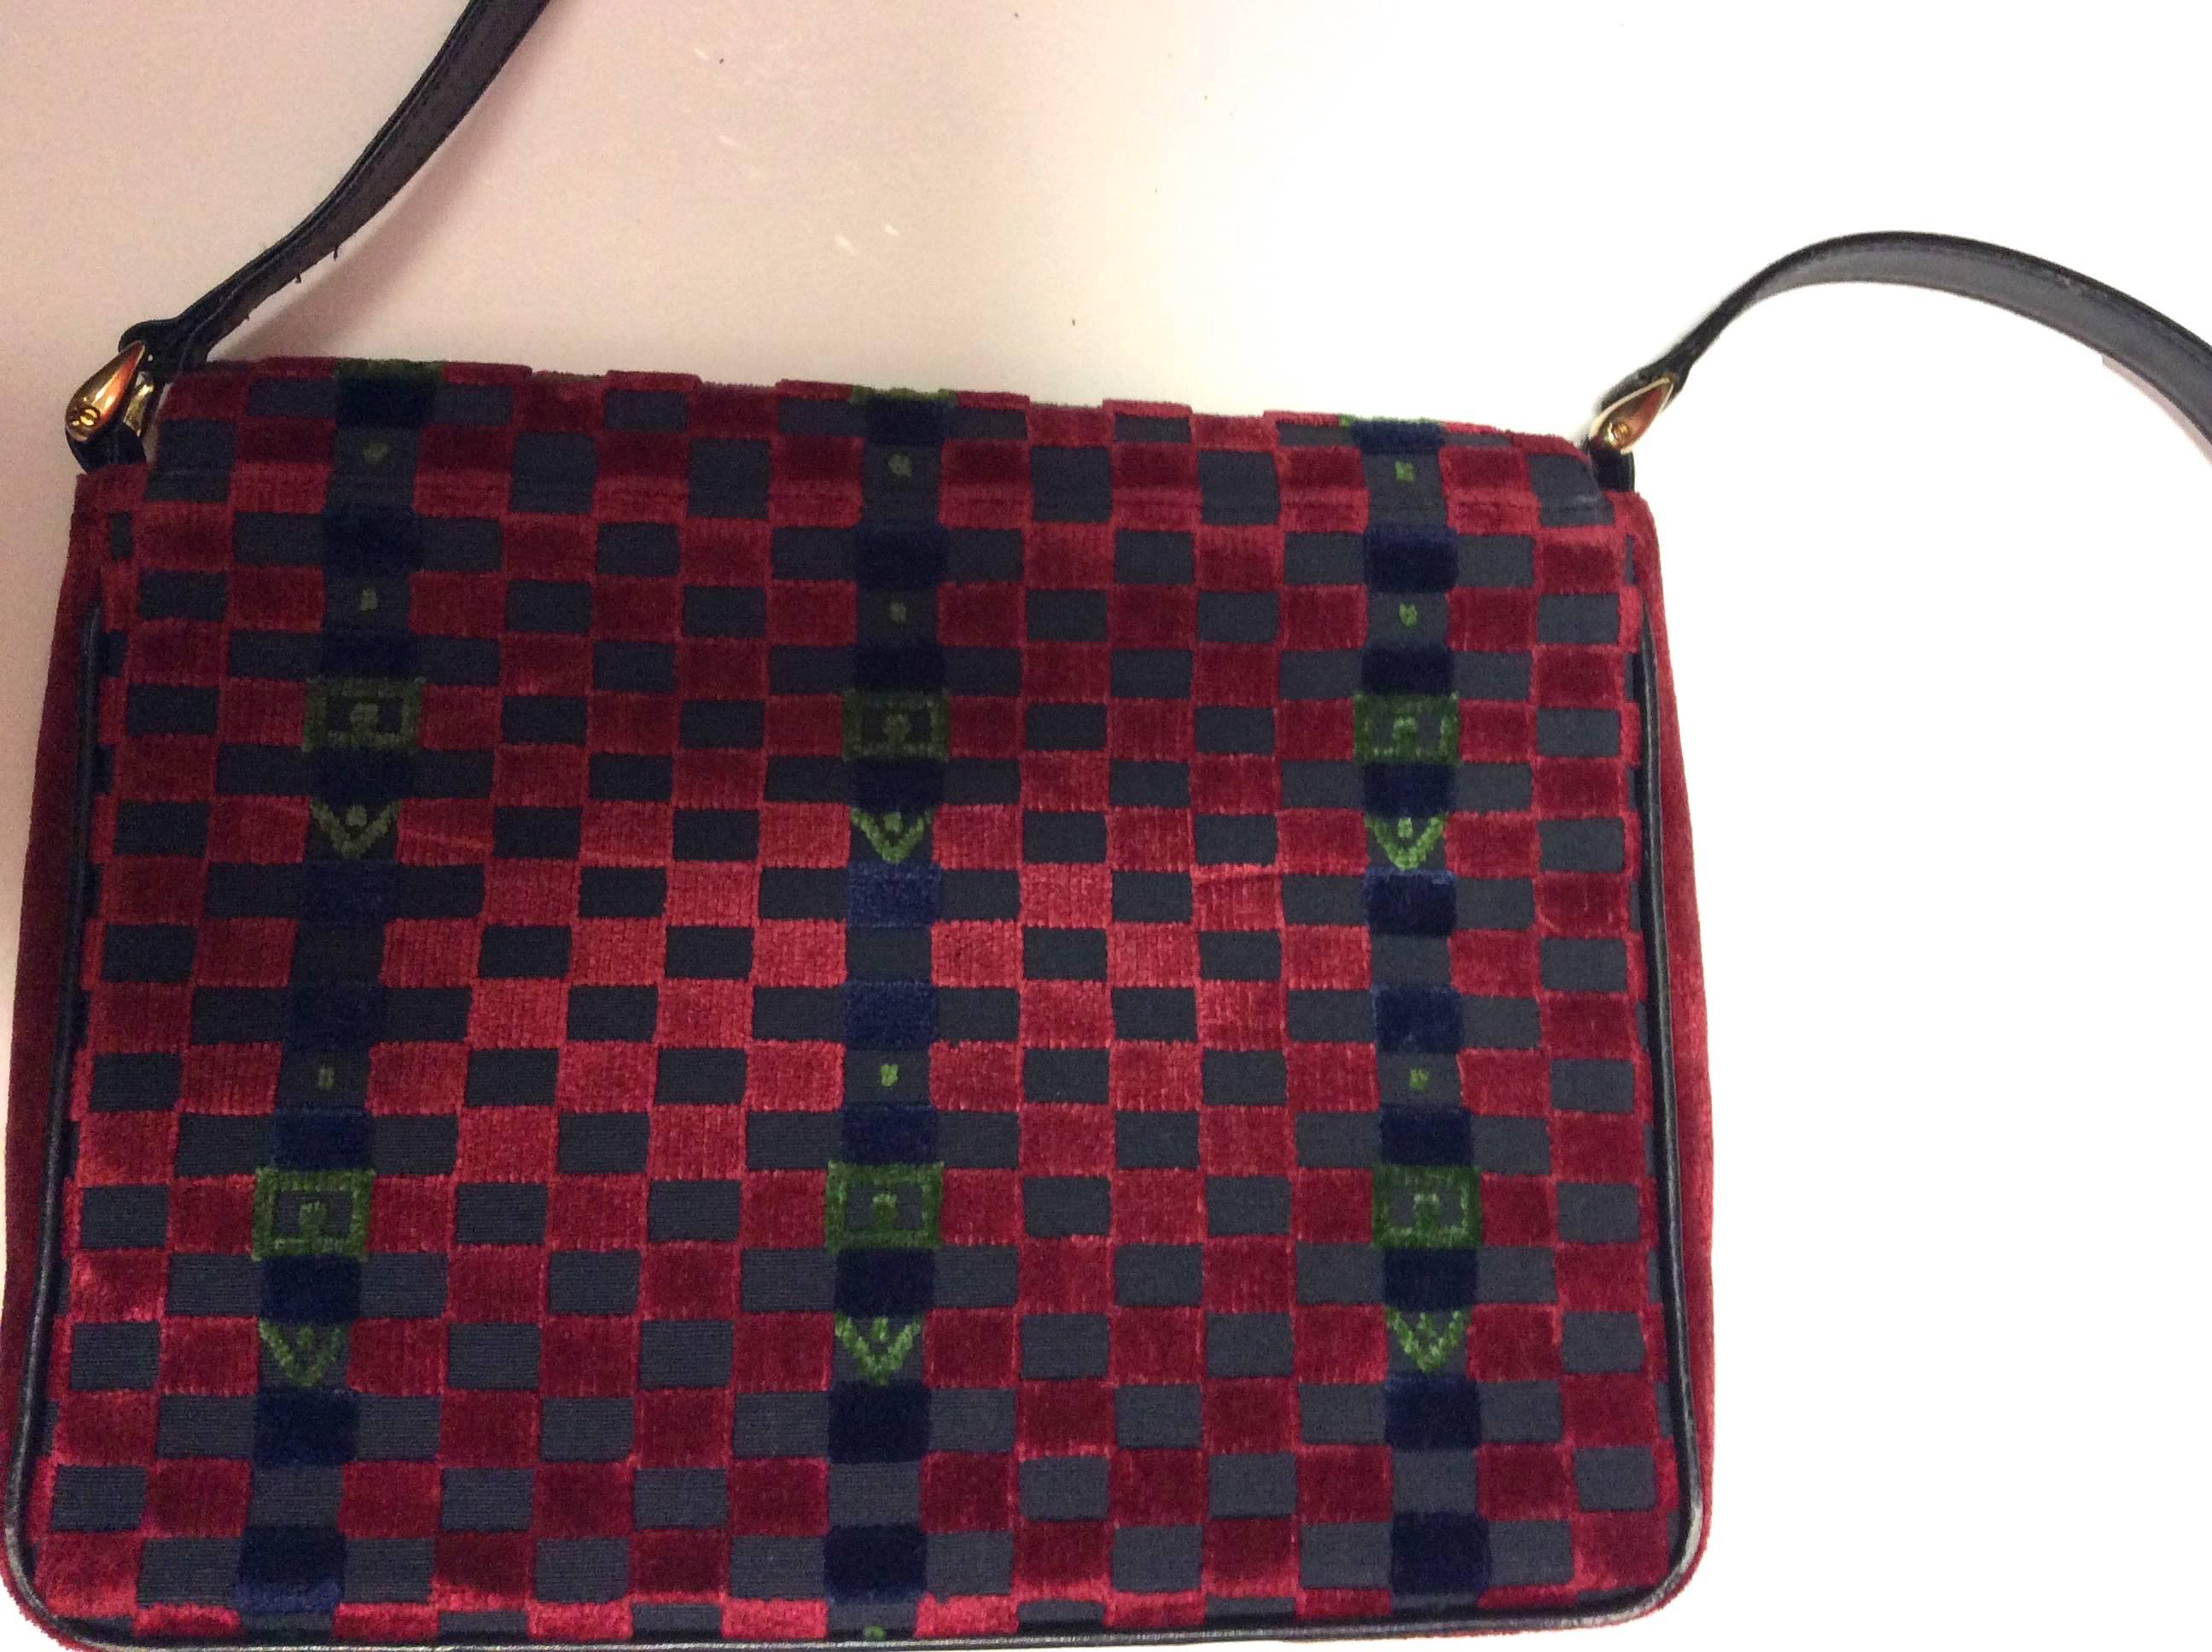 Presented here is a gorgeous vintage Roberta diCamerino purse. The purse is from the late 1970's. The purse has a checkered pattern on the exterior made of velvet. The pattern consists of red, blue, and green checks across each side of the bag. The